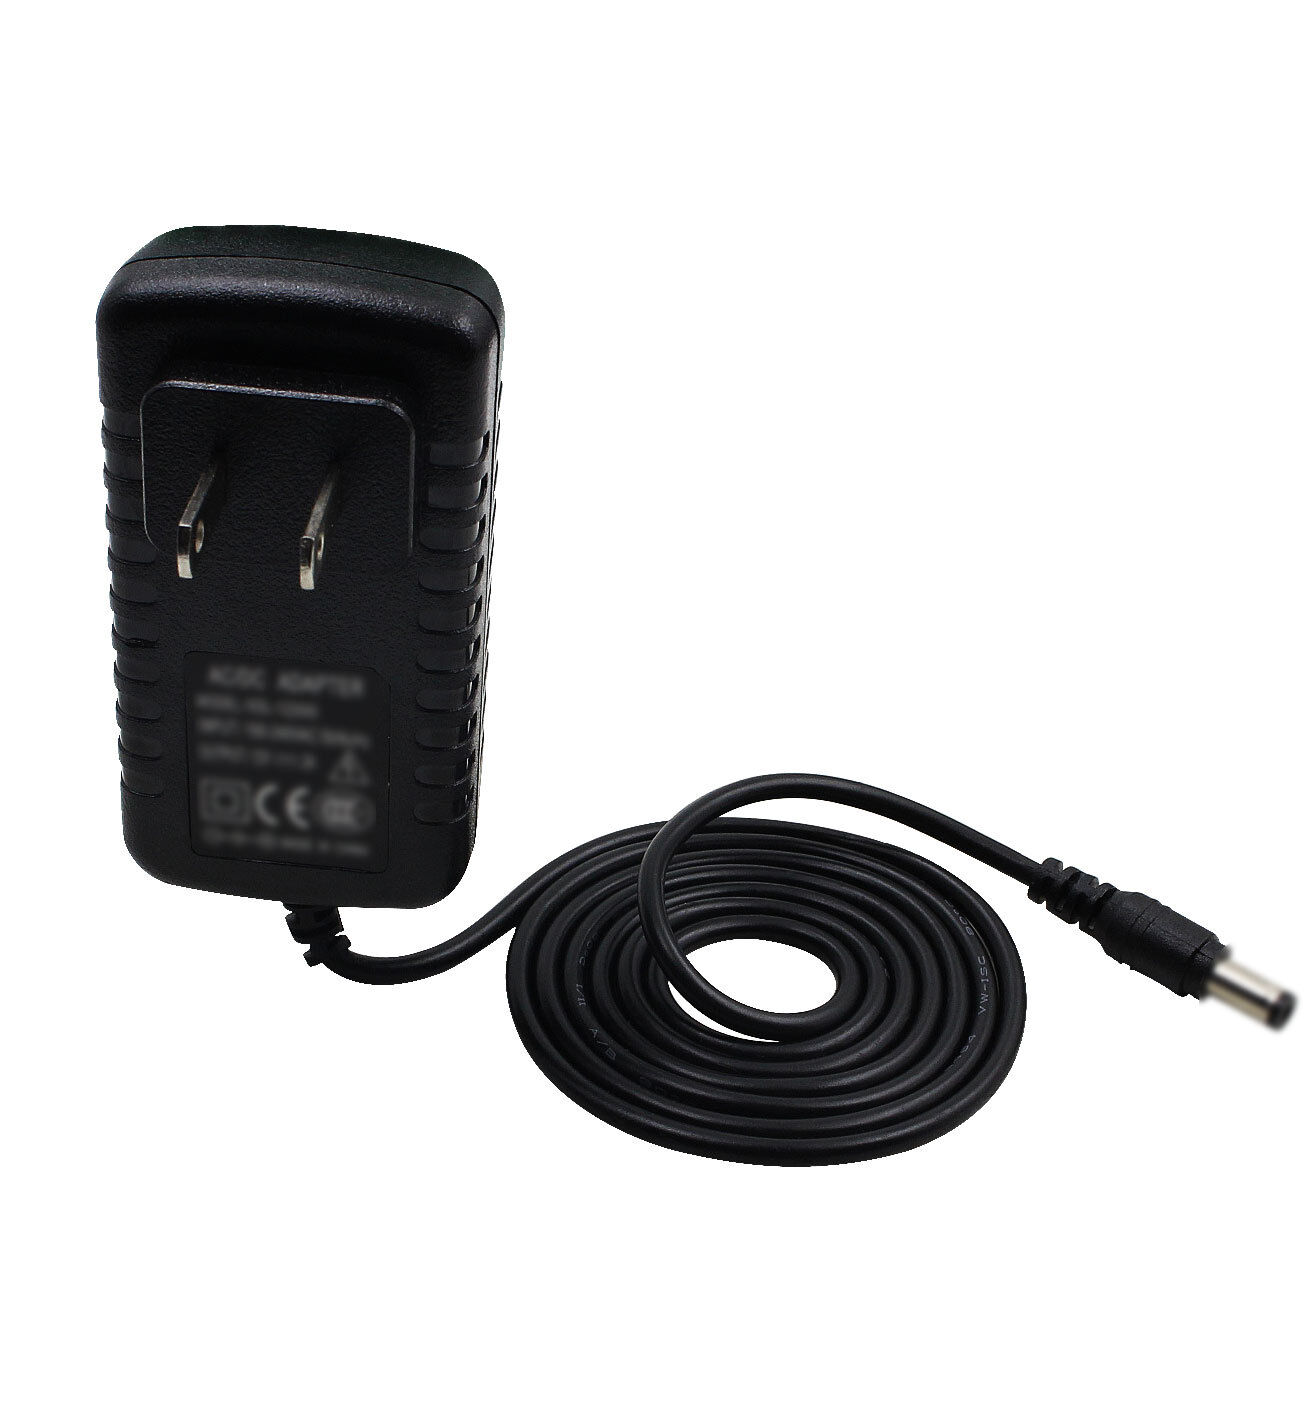 48v Power Supply, 48v Power Adapter is Compatible with polycom IP Phones VVX 300, 301, 3